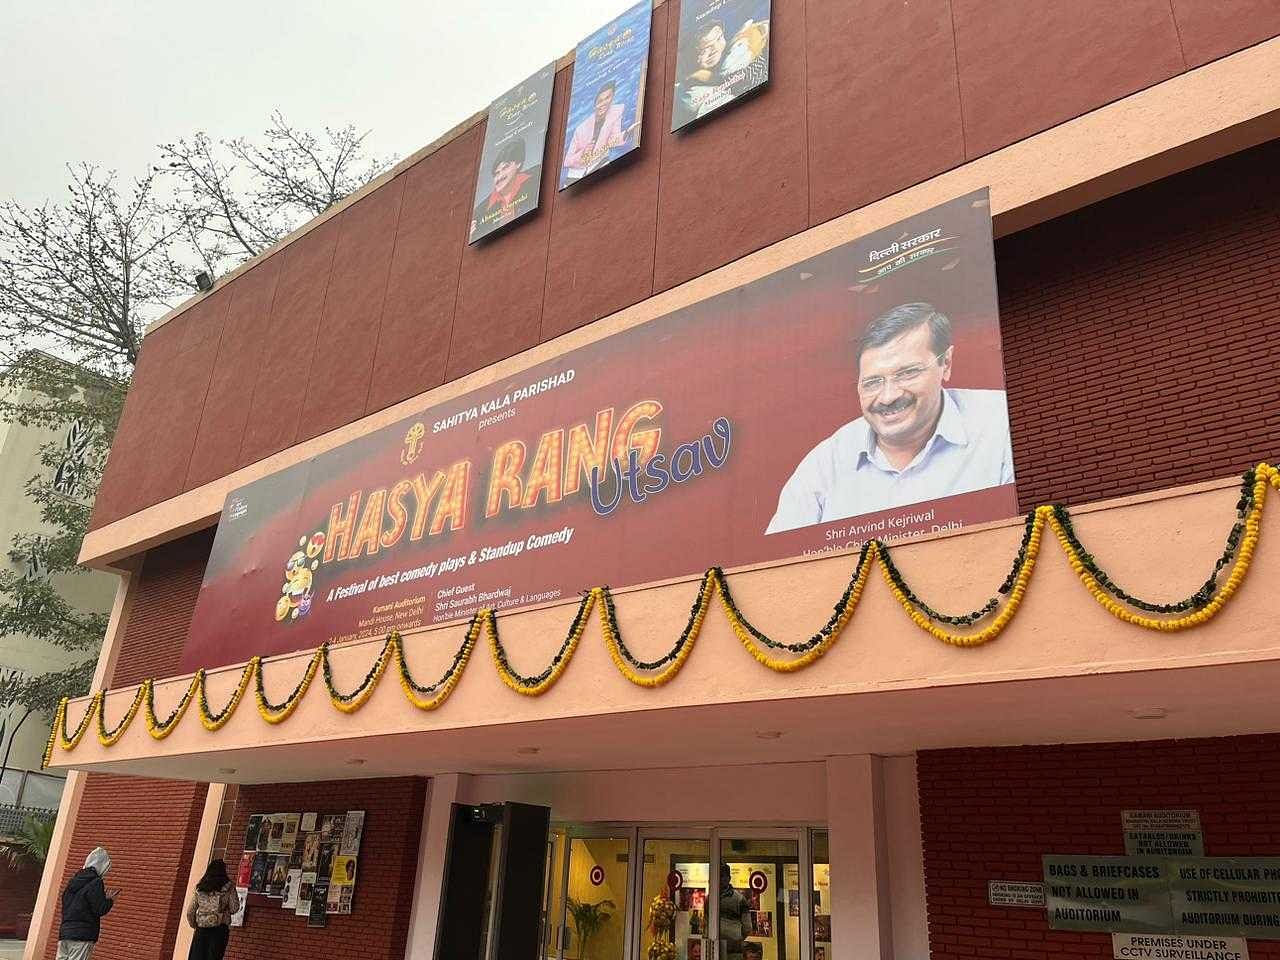 Delhi government’s comedy show last week was all about telling people all is well, don’t worry, be happy | Nootan Sharma, ThePrint